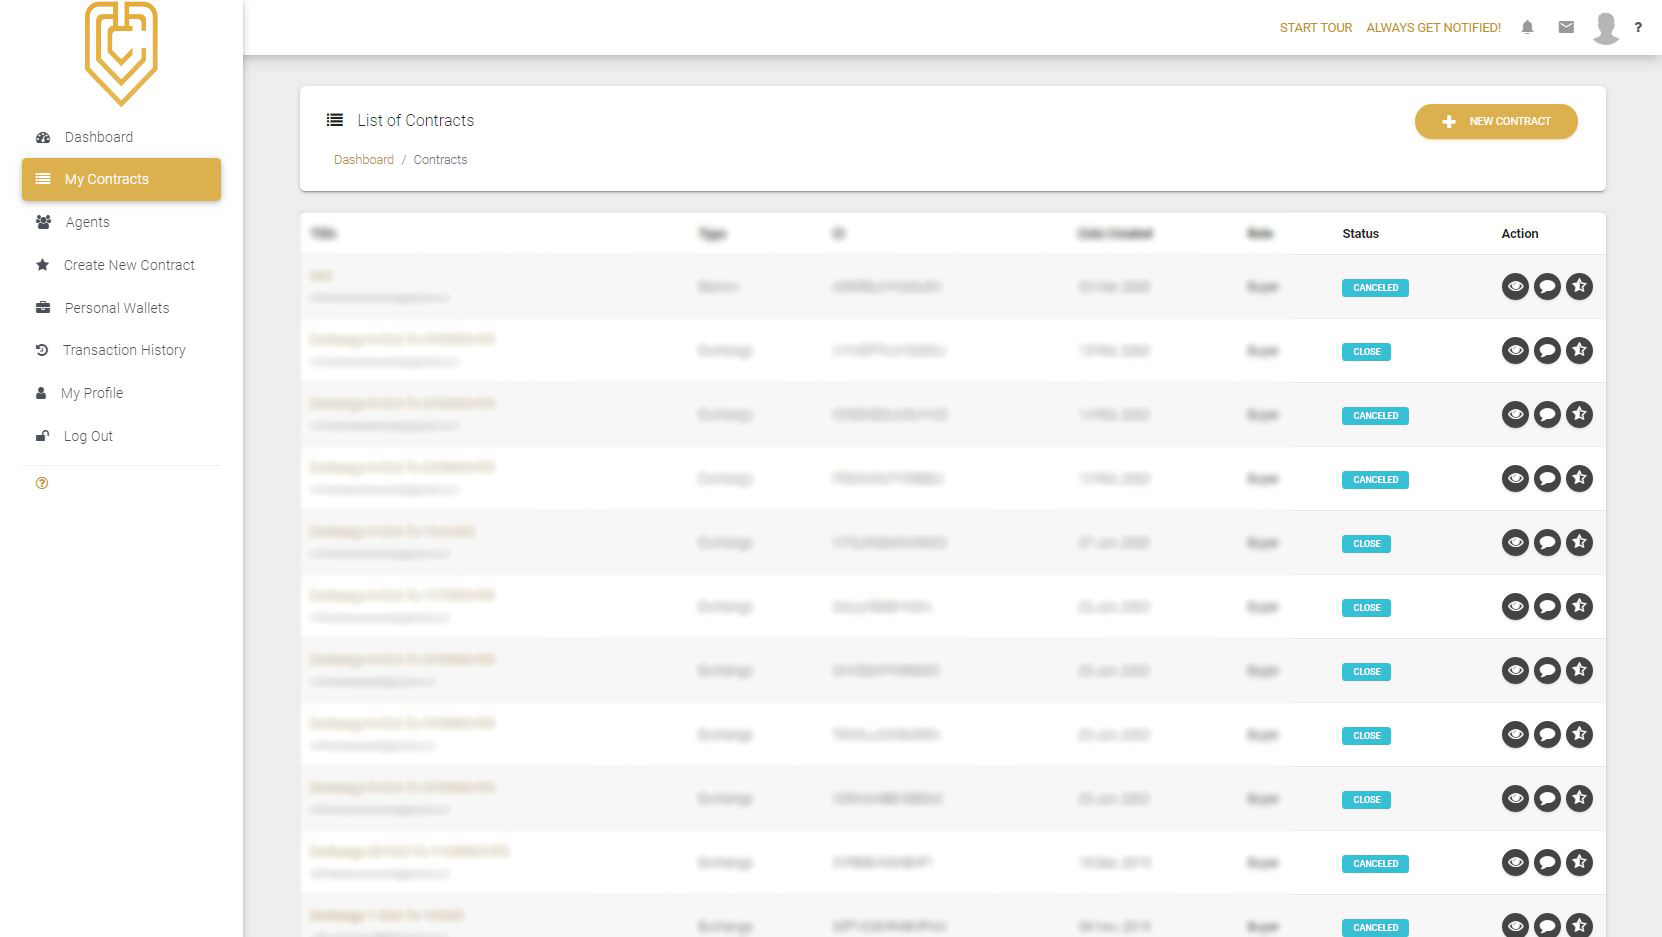 In this part you can view the history of your contracts and by clicking on each one of them view their details